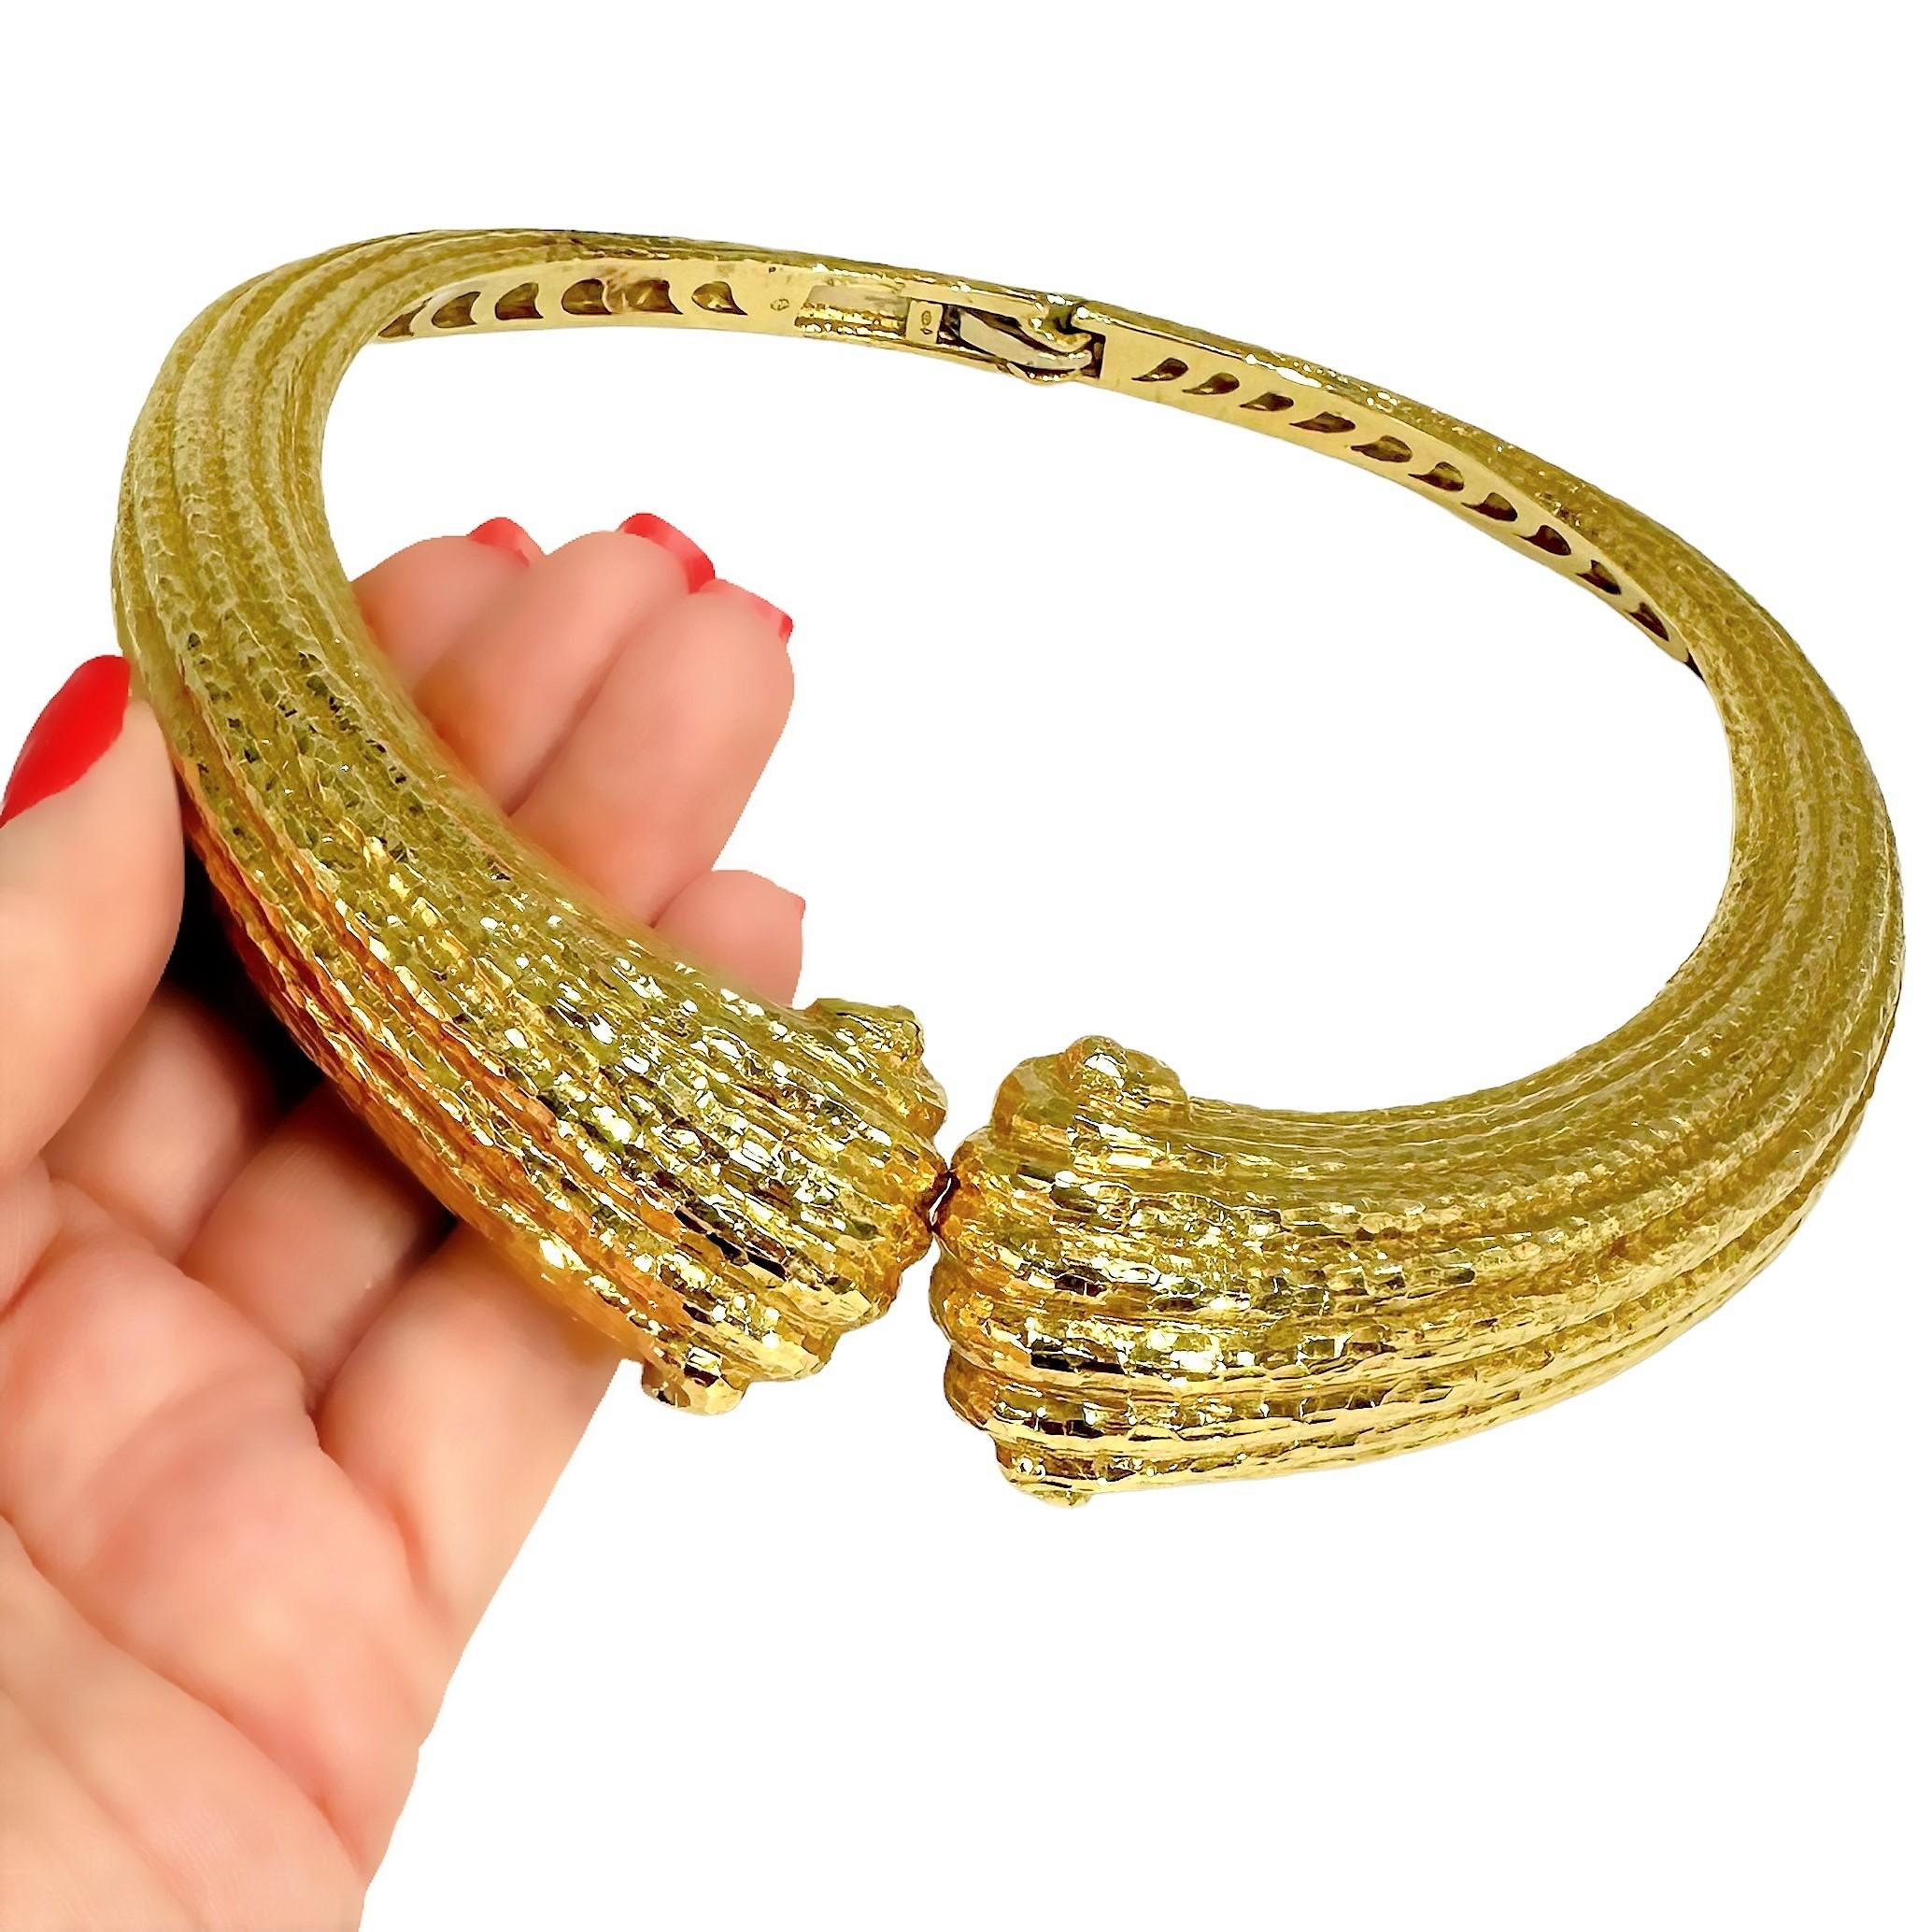 Massive 18K Yellow Gold, Hammered Finish, Italian Scroll Motif Choker Necklace For Sale 6